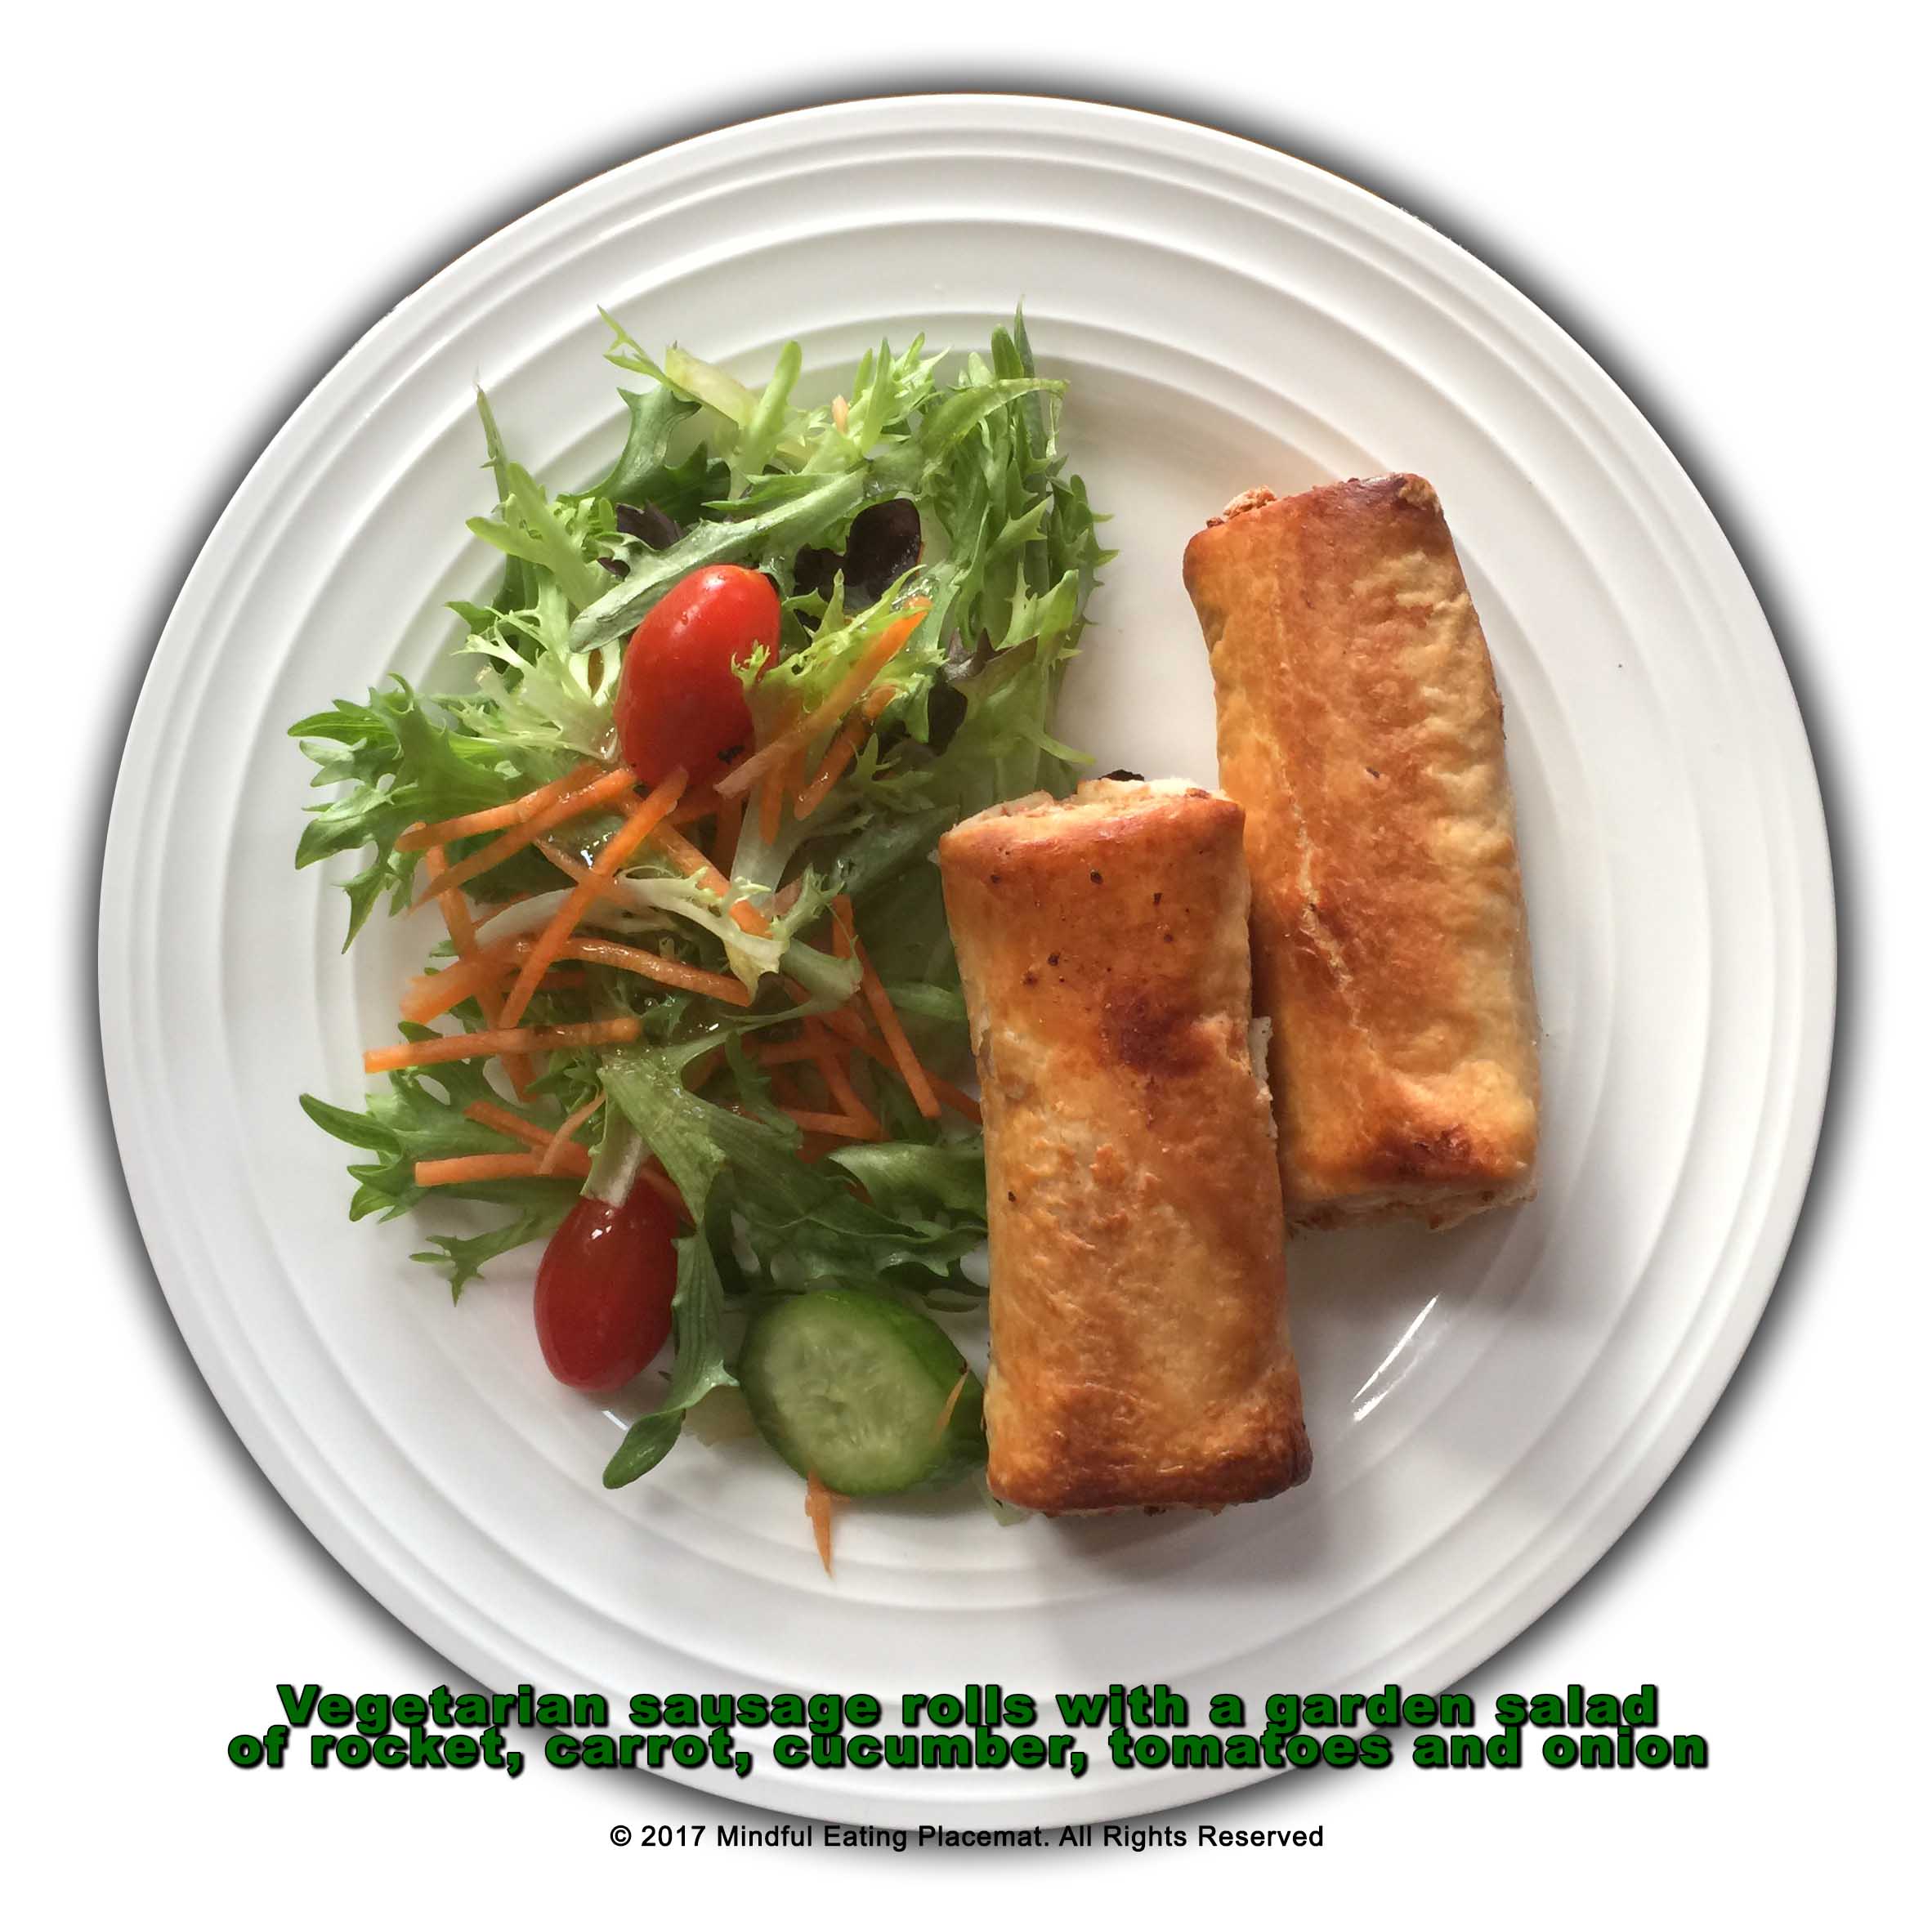 Vegetarian sausage rolls with a green salad